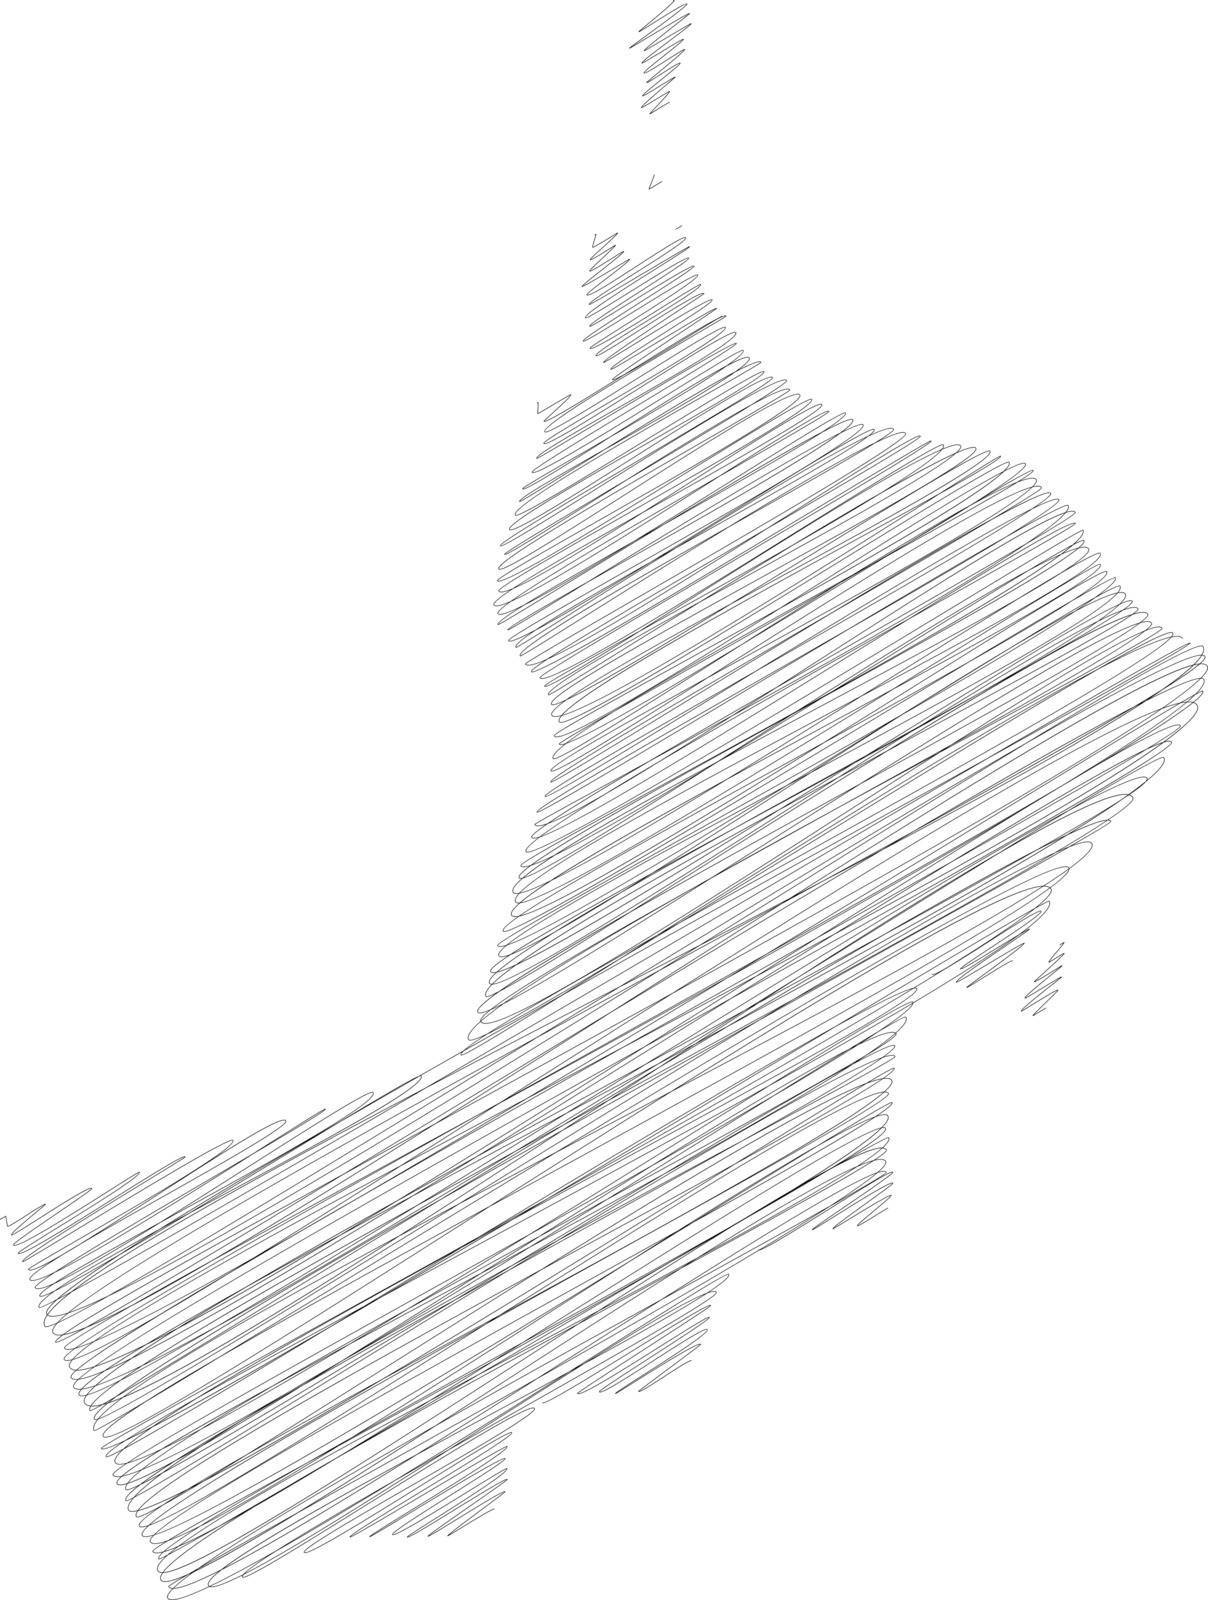 Oman - pencil scribble sketch silhouette map of country area with dropped shadow. Simple flat vector illustration.